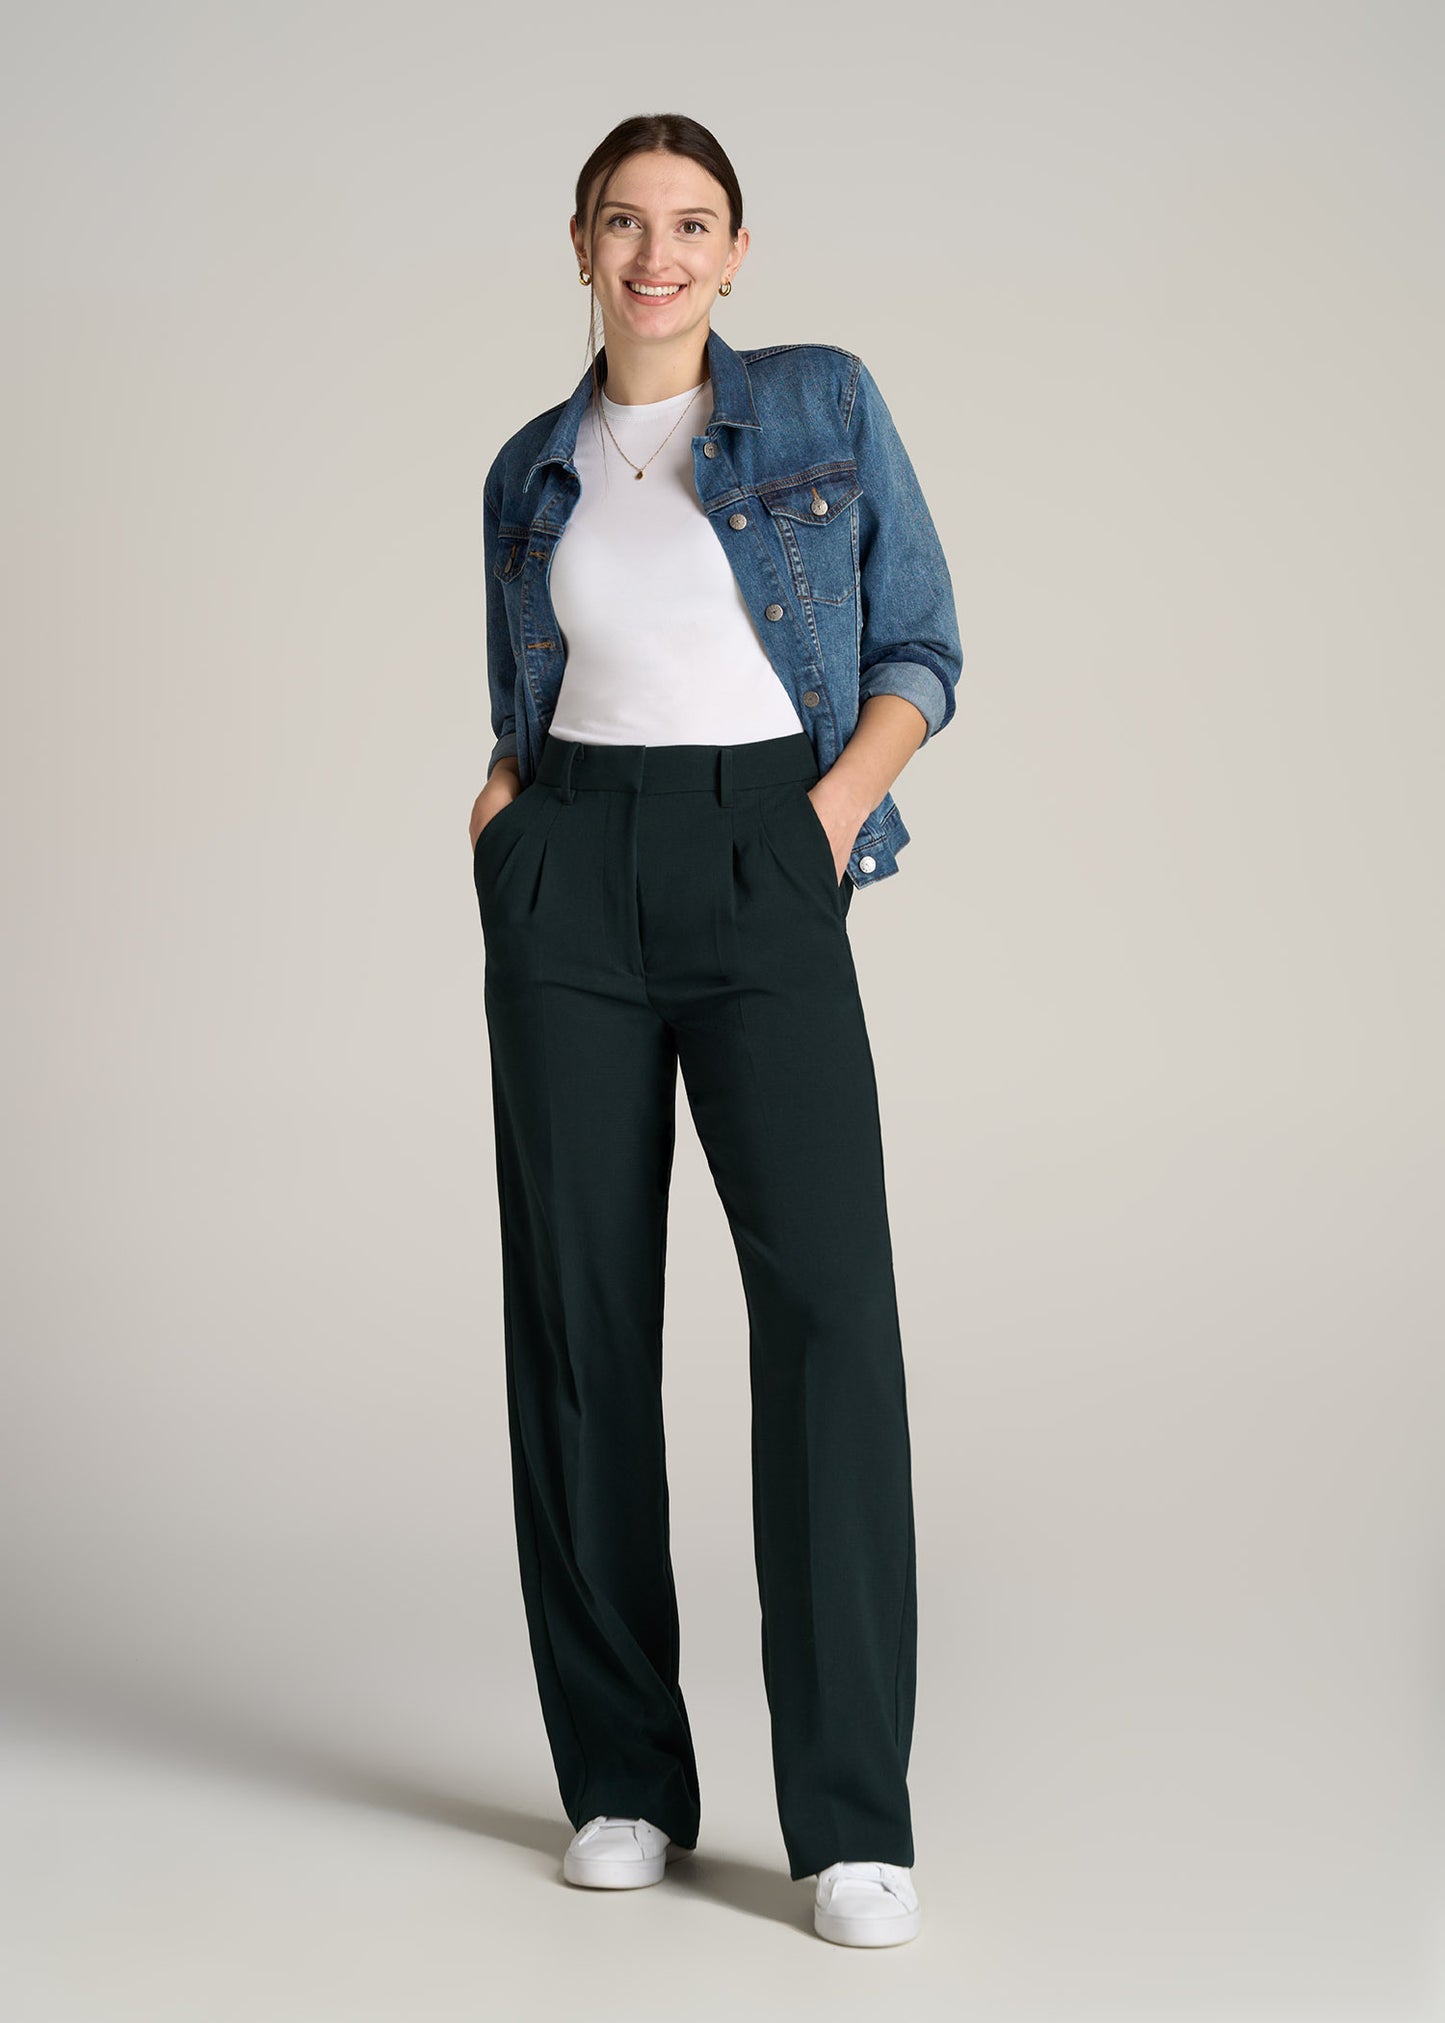 A tall woman wearing Pleated WIDE Leg Dress Pants for Tall Women in Midnight Green from American Tall